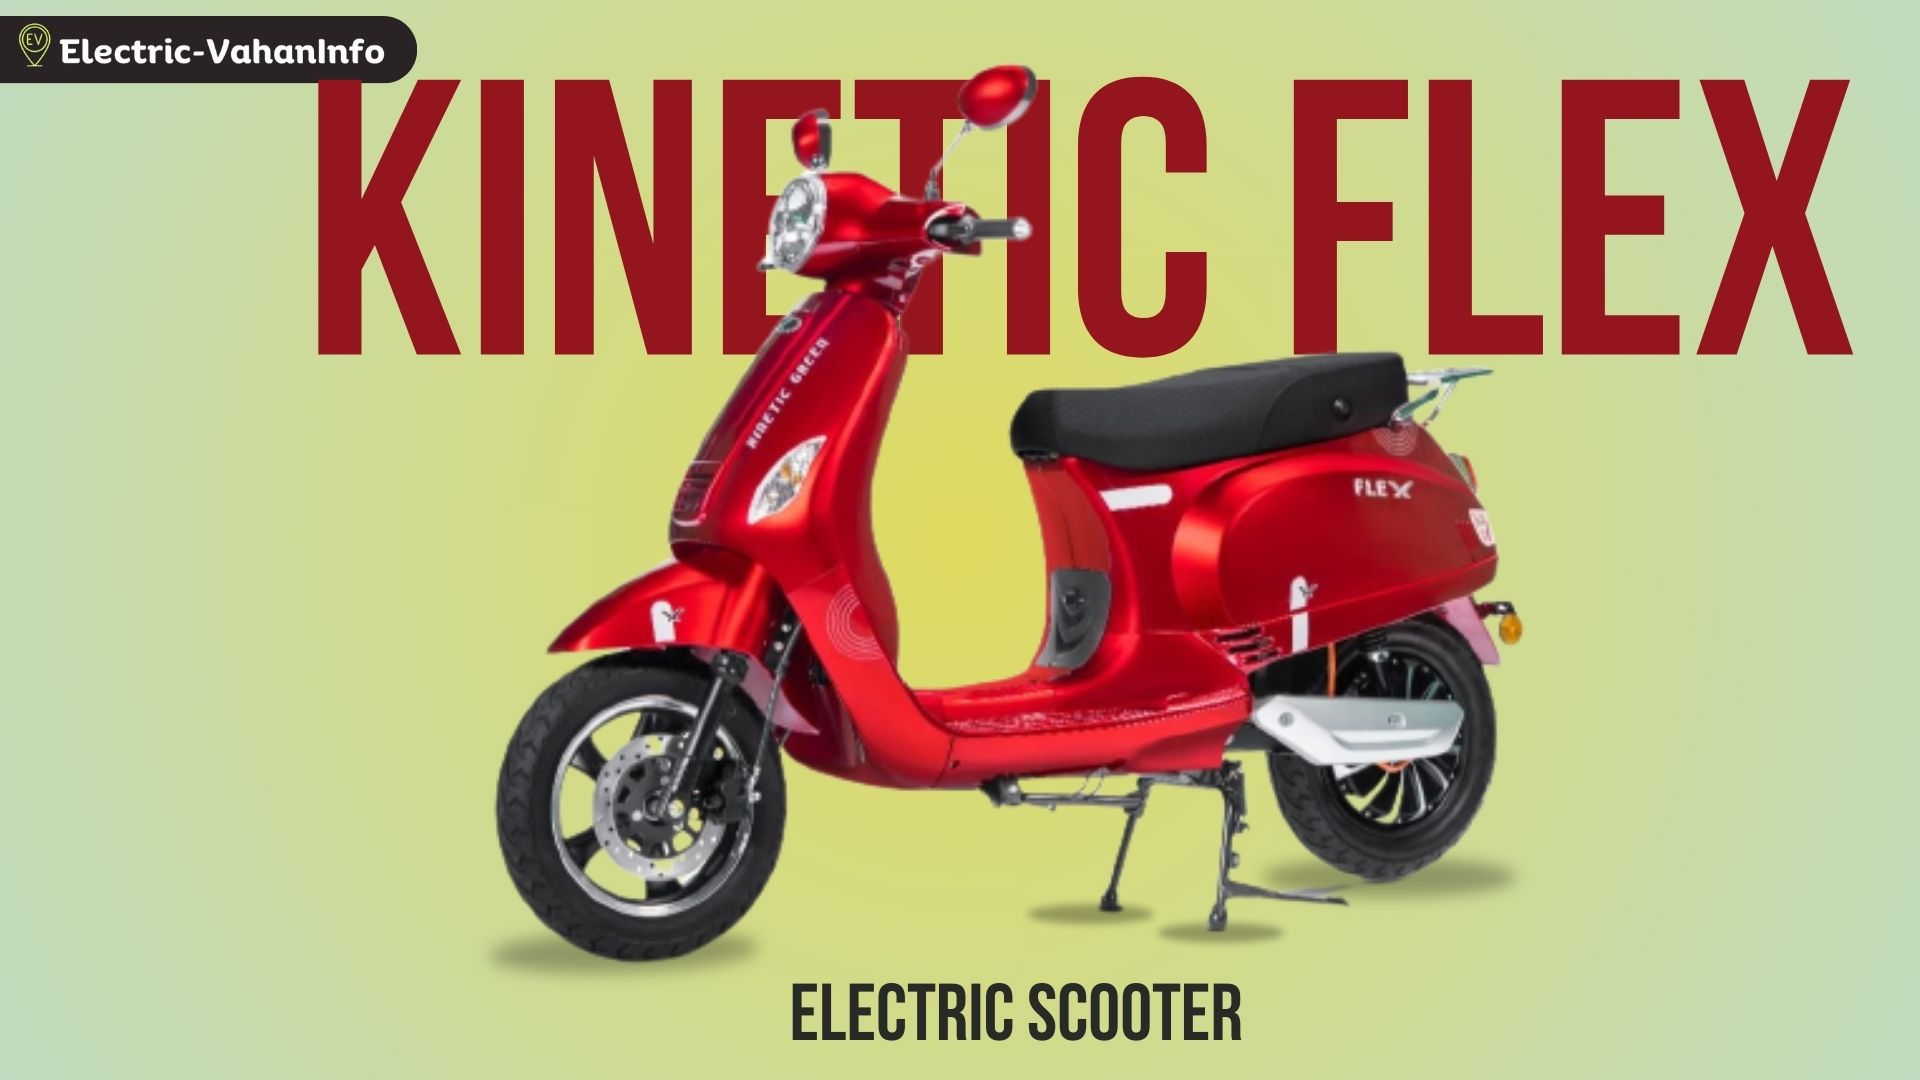 https://electric-vahaninfo.com/kinetic-flex-electric-scooter-price-range-and-specifications/